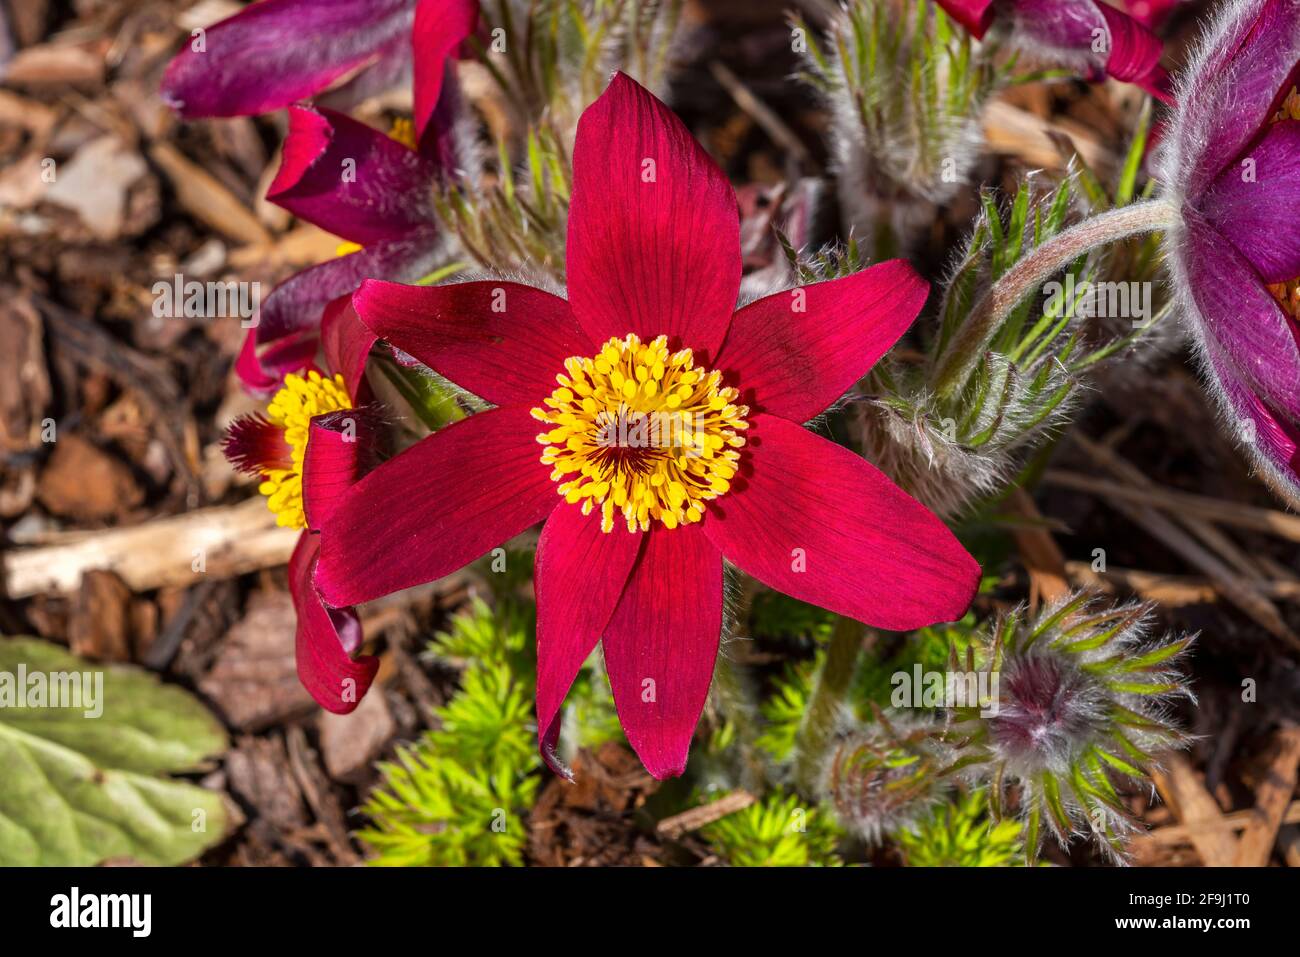 Pulsatilla vulgaris 'Pinwheel Dark Red Shades' a spring flowering plant commonly known as Pasque flower which is in blossom during March and April, st Stock Photo